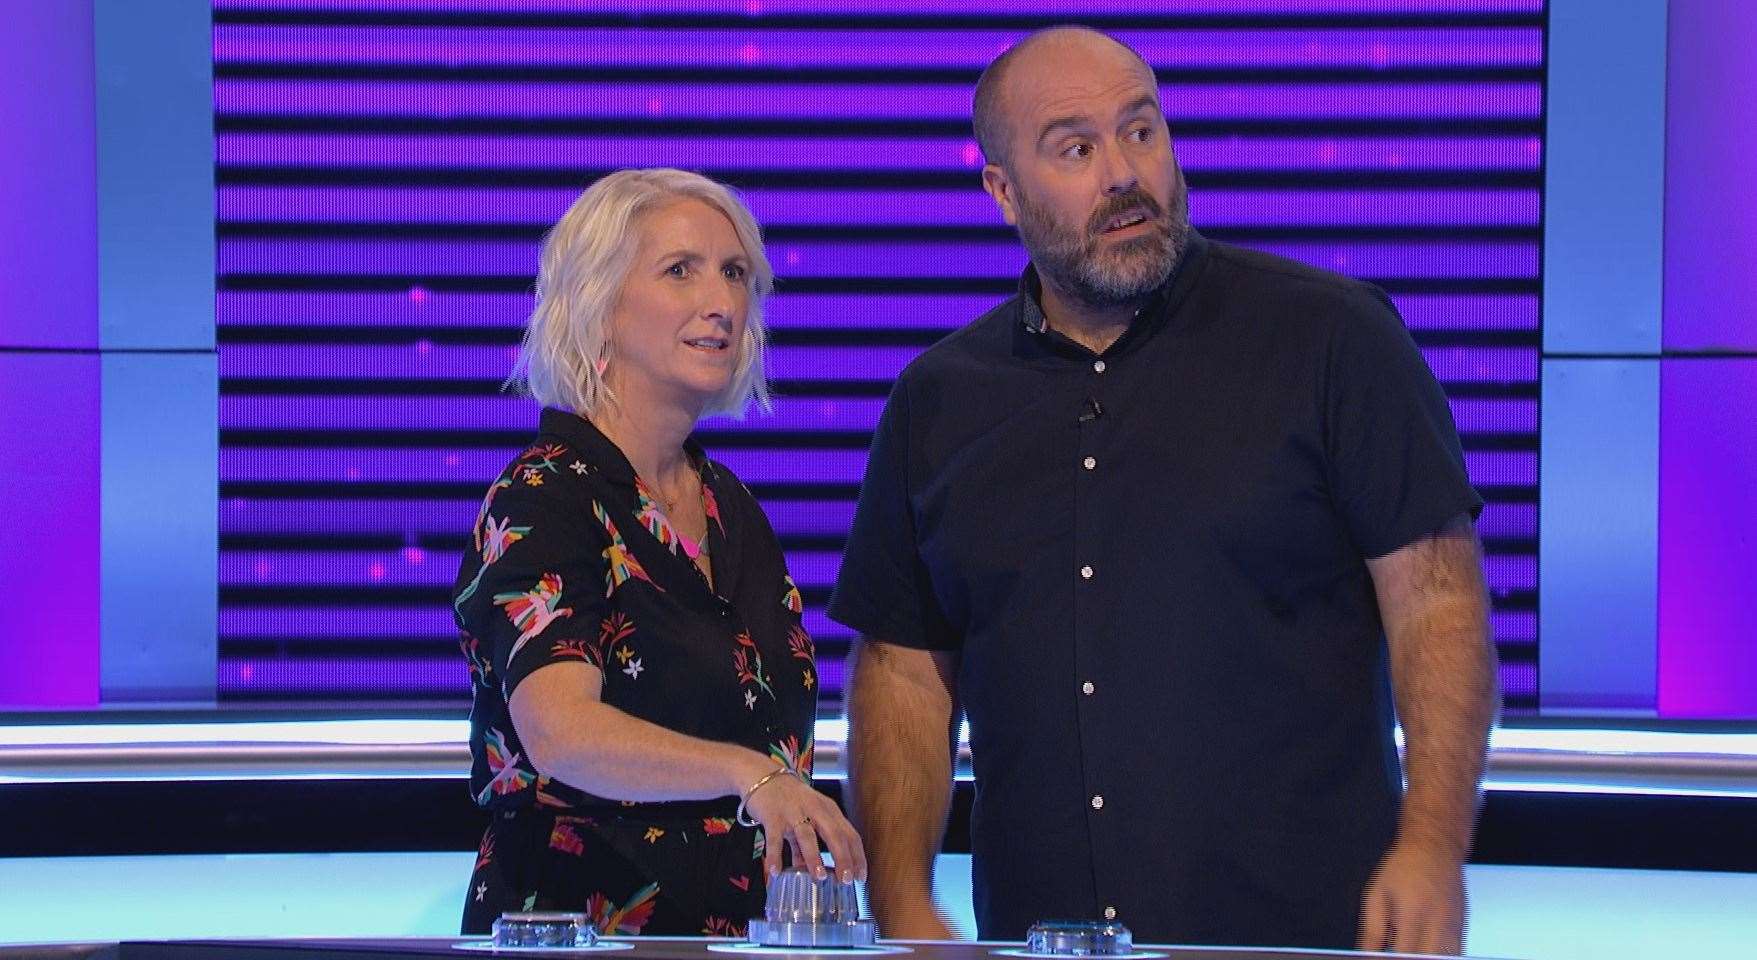 The Suffolk couple scooped £1 million on the show. Picture: ITV